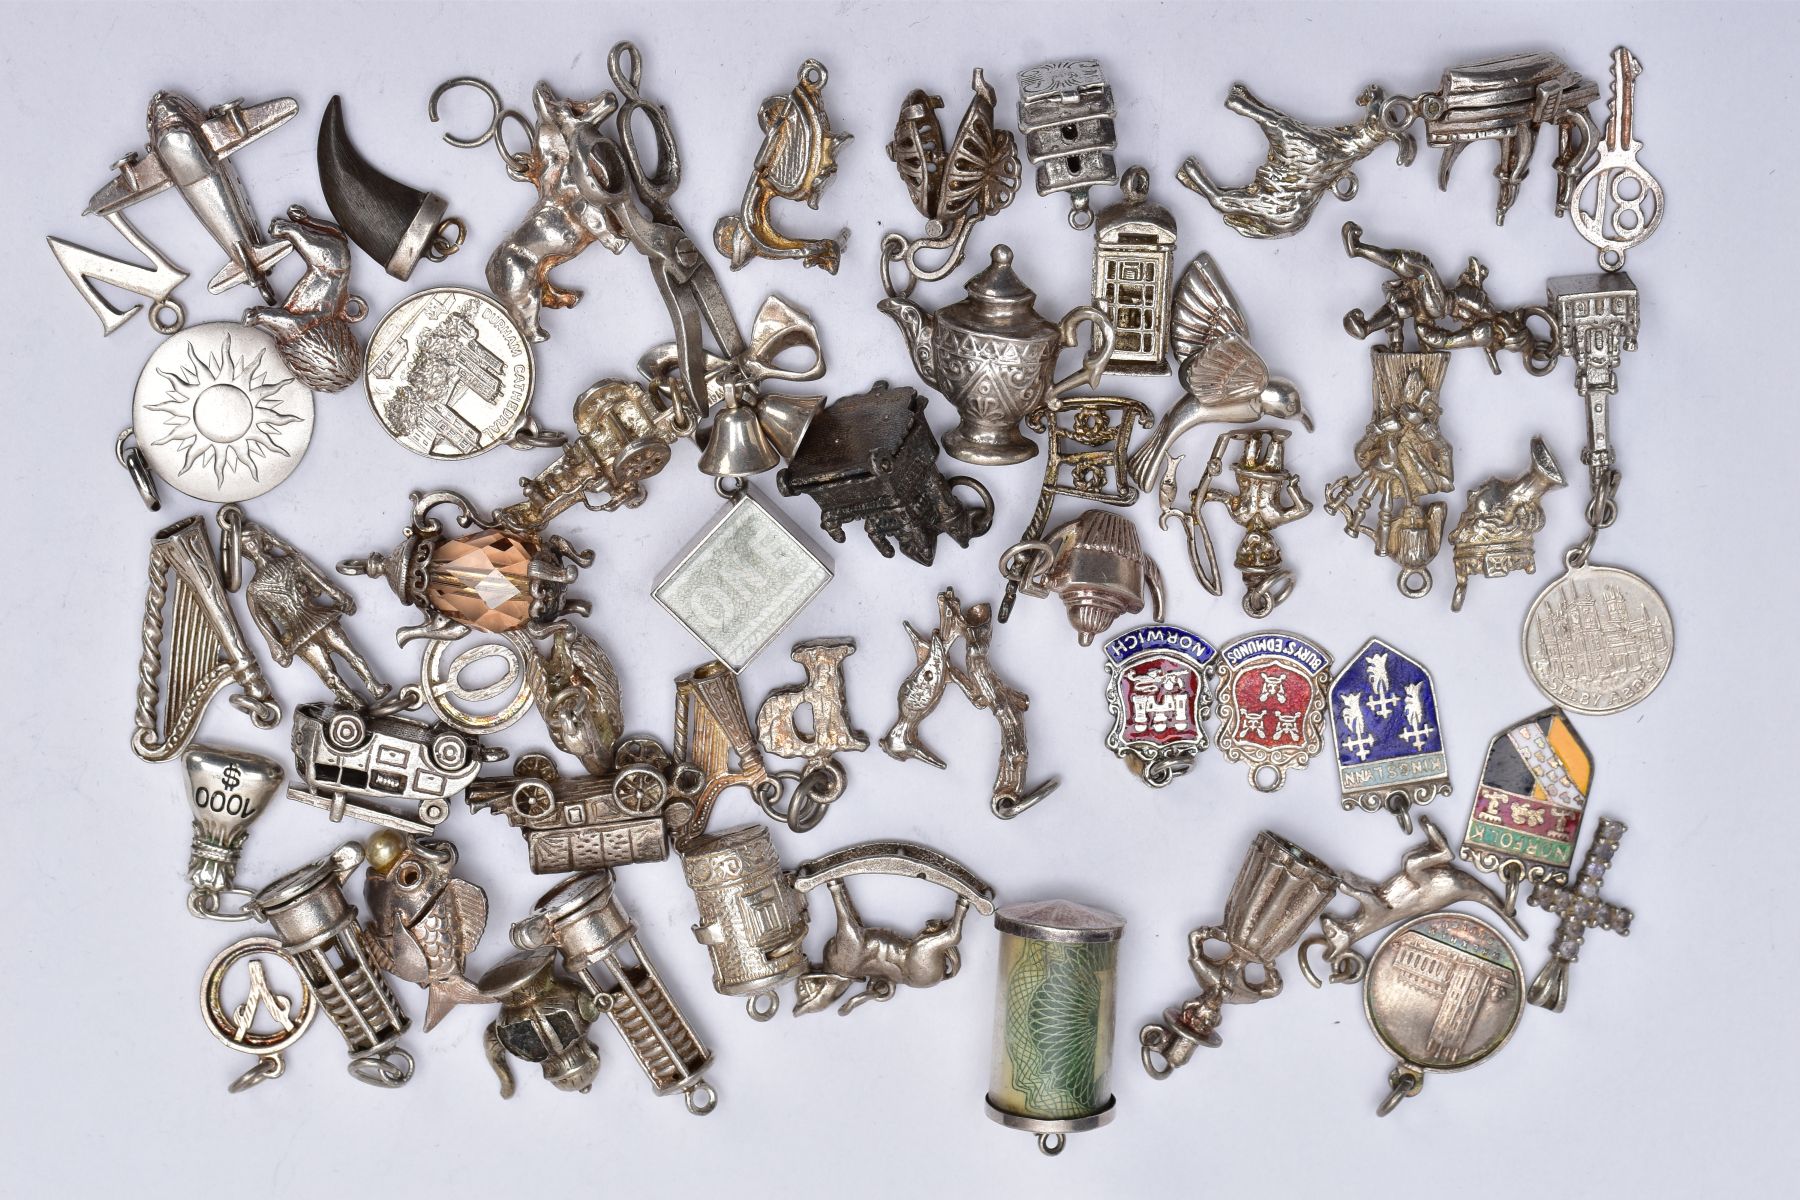 A QUANTITY OF SILVER AND WHITE METAL CHARMS, to include fifty six charms in various forms such as